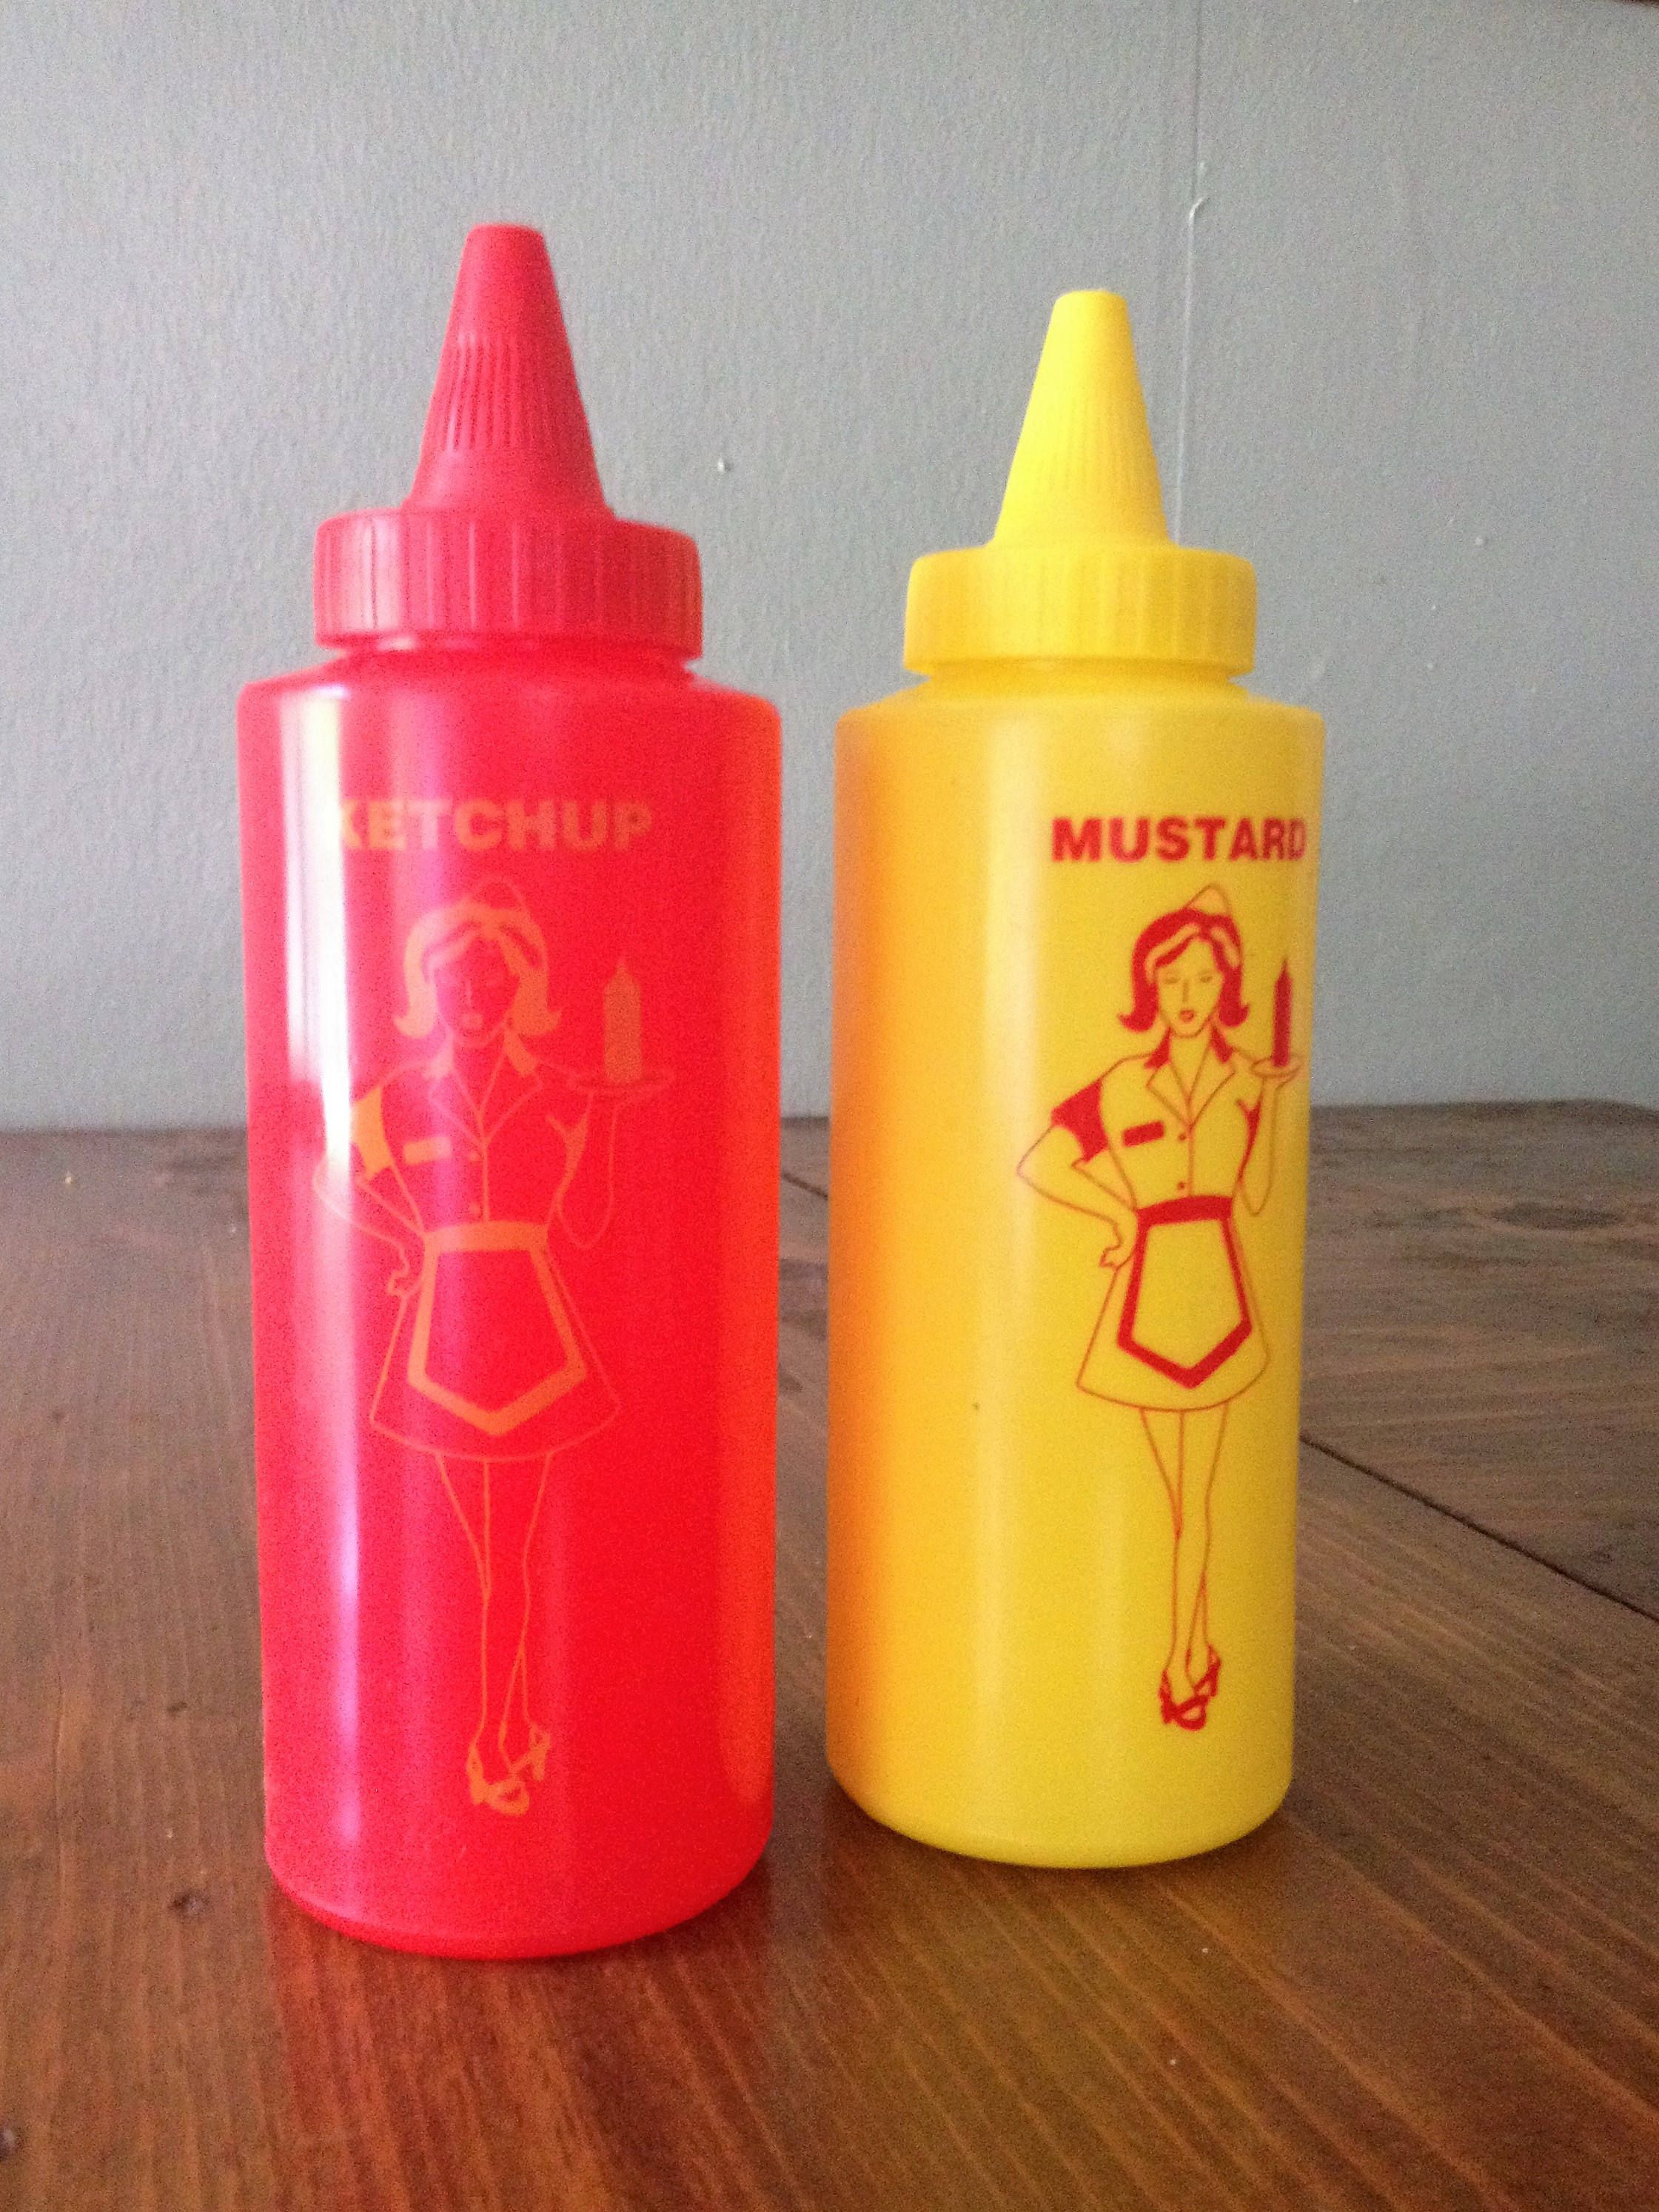 Vintage Mustard Ketchup Holders Diner 50s Style by Piklandia on Etsy ...